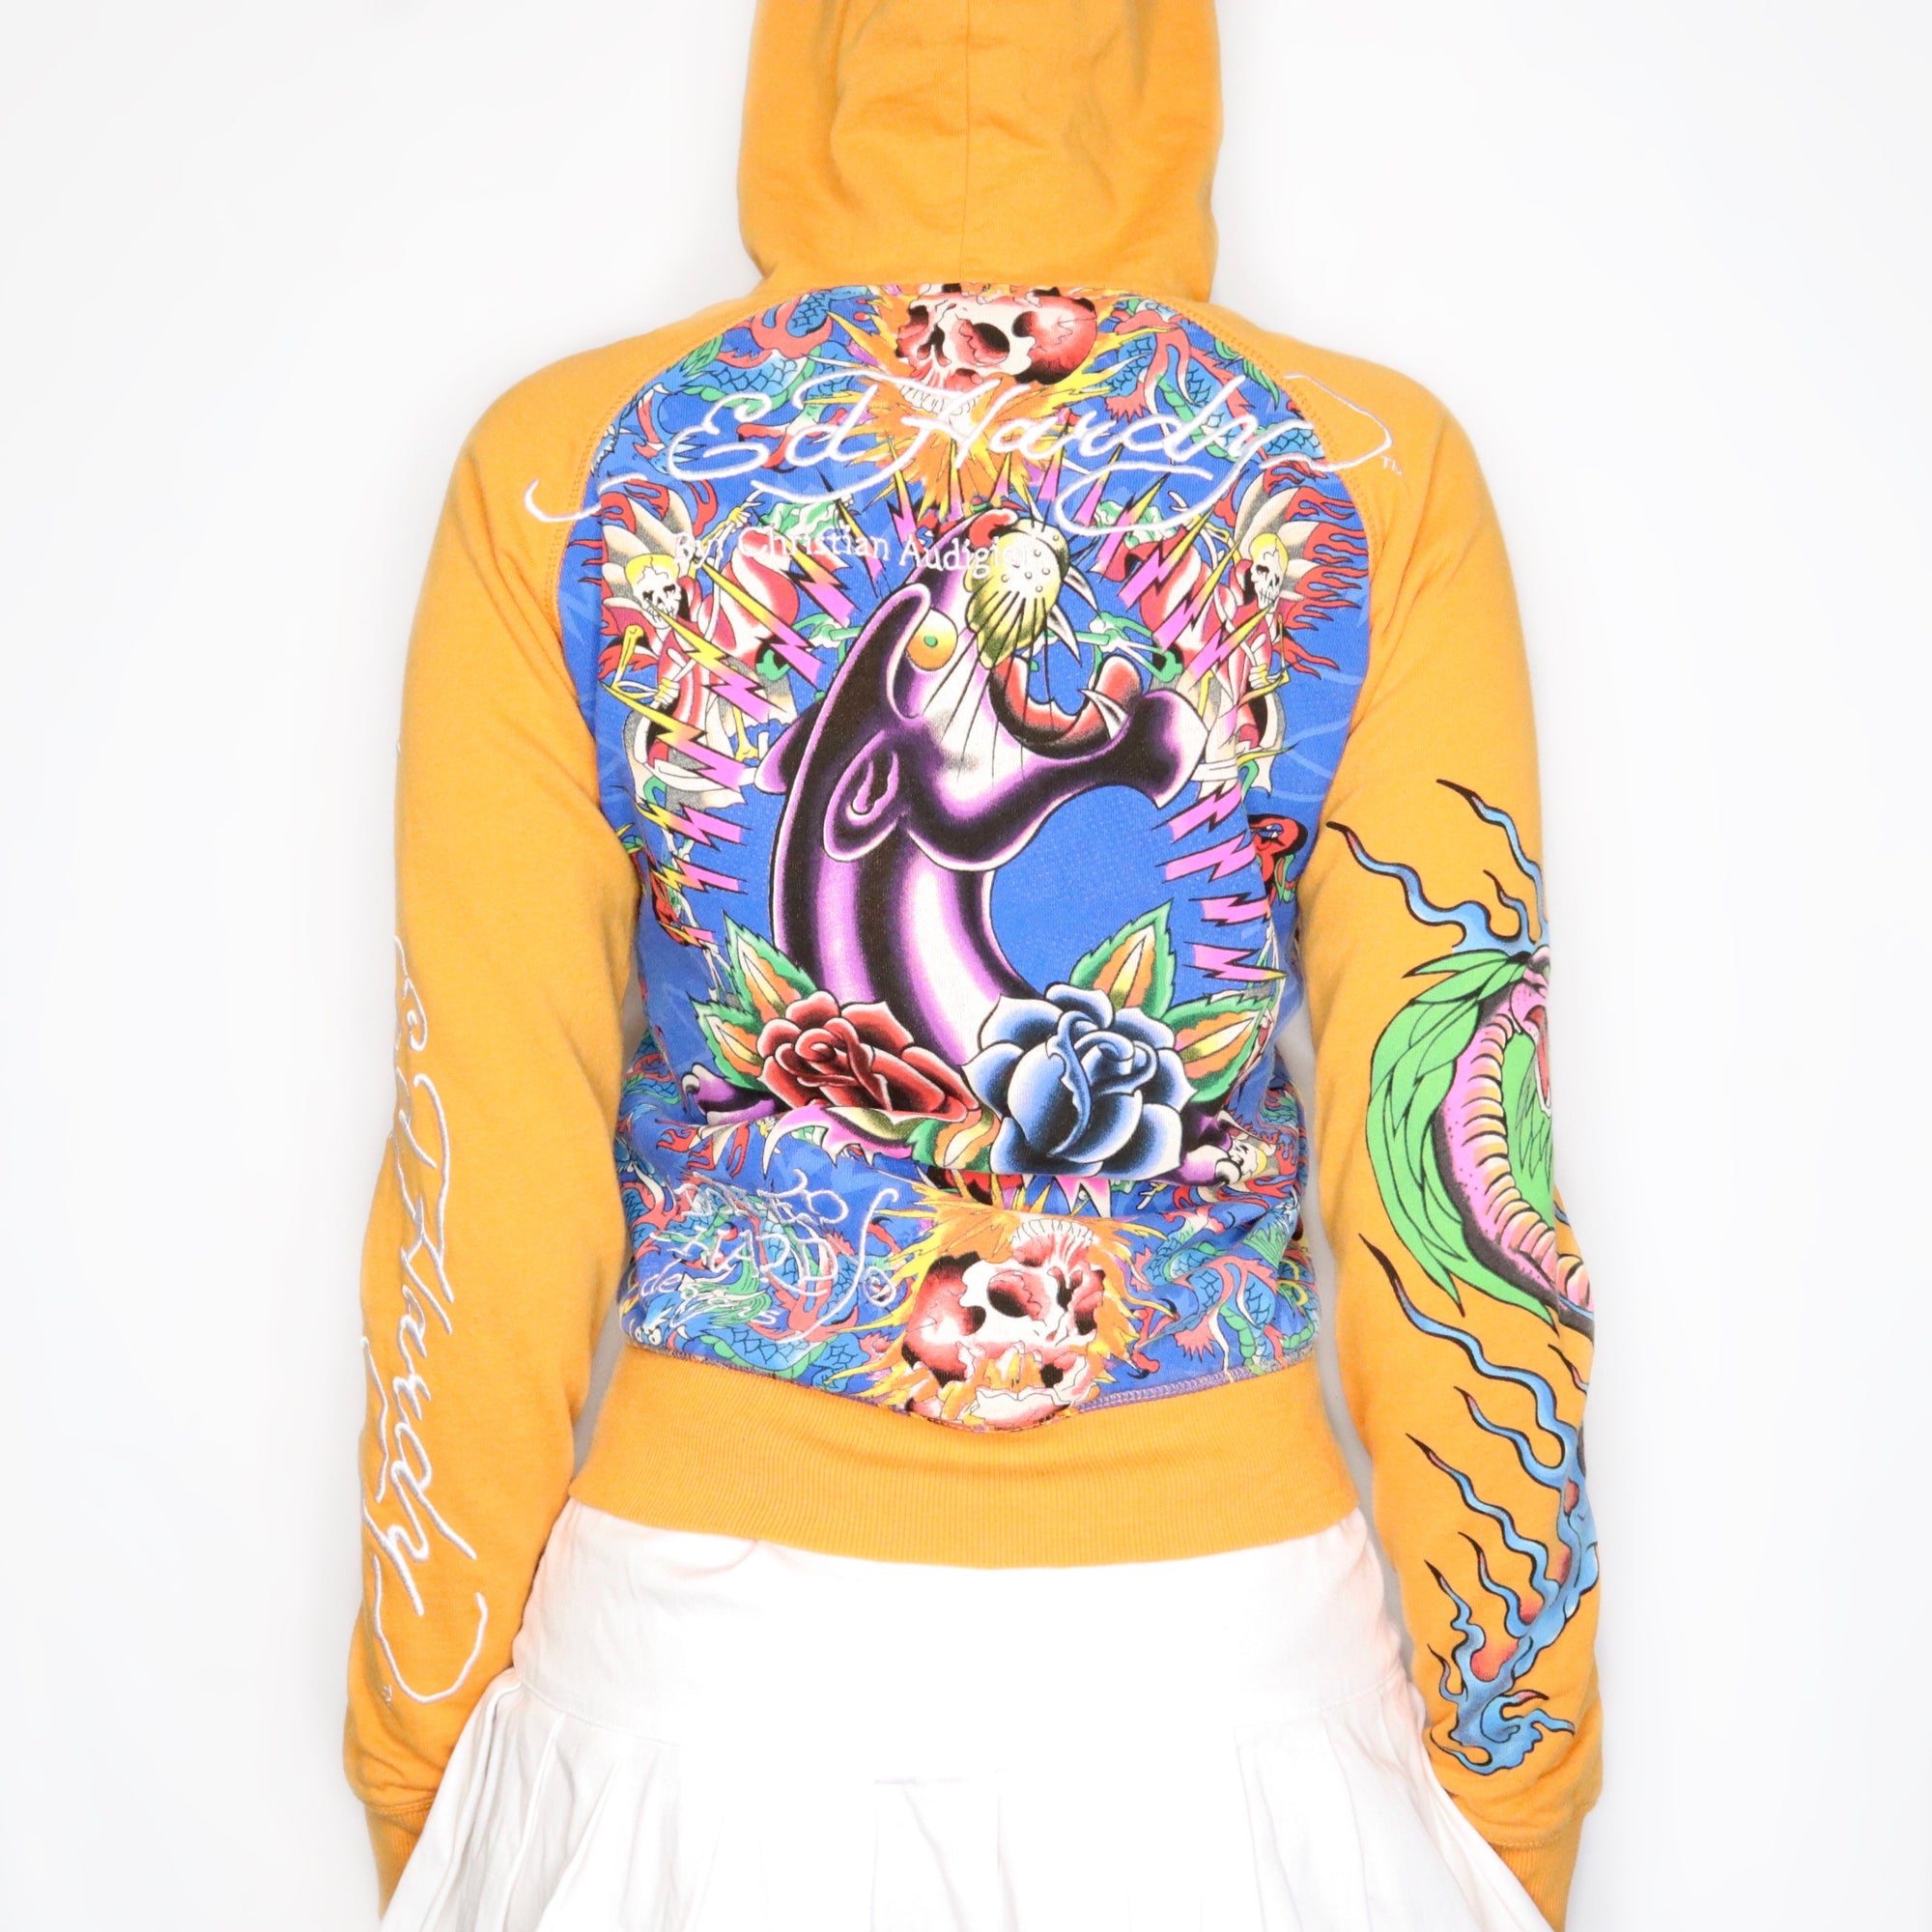 Rare Vintage Early 2000s Ed Hardy Tattoo Graphic Hoodie